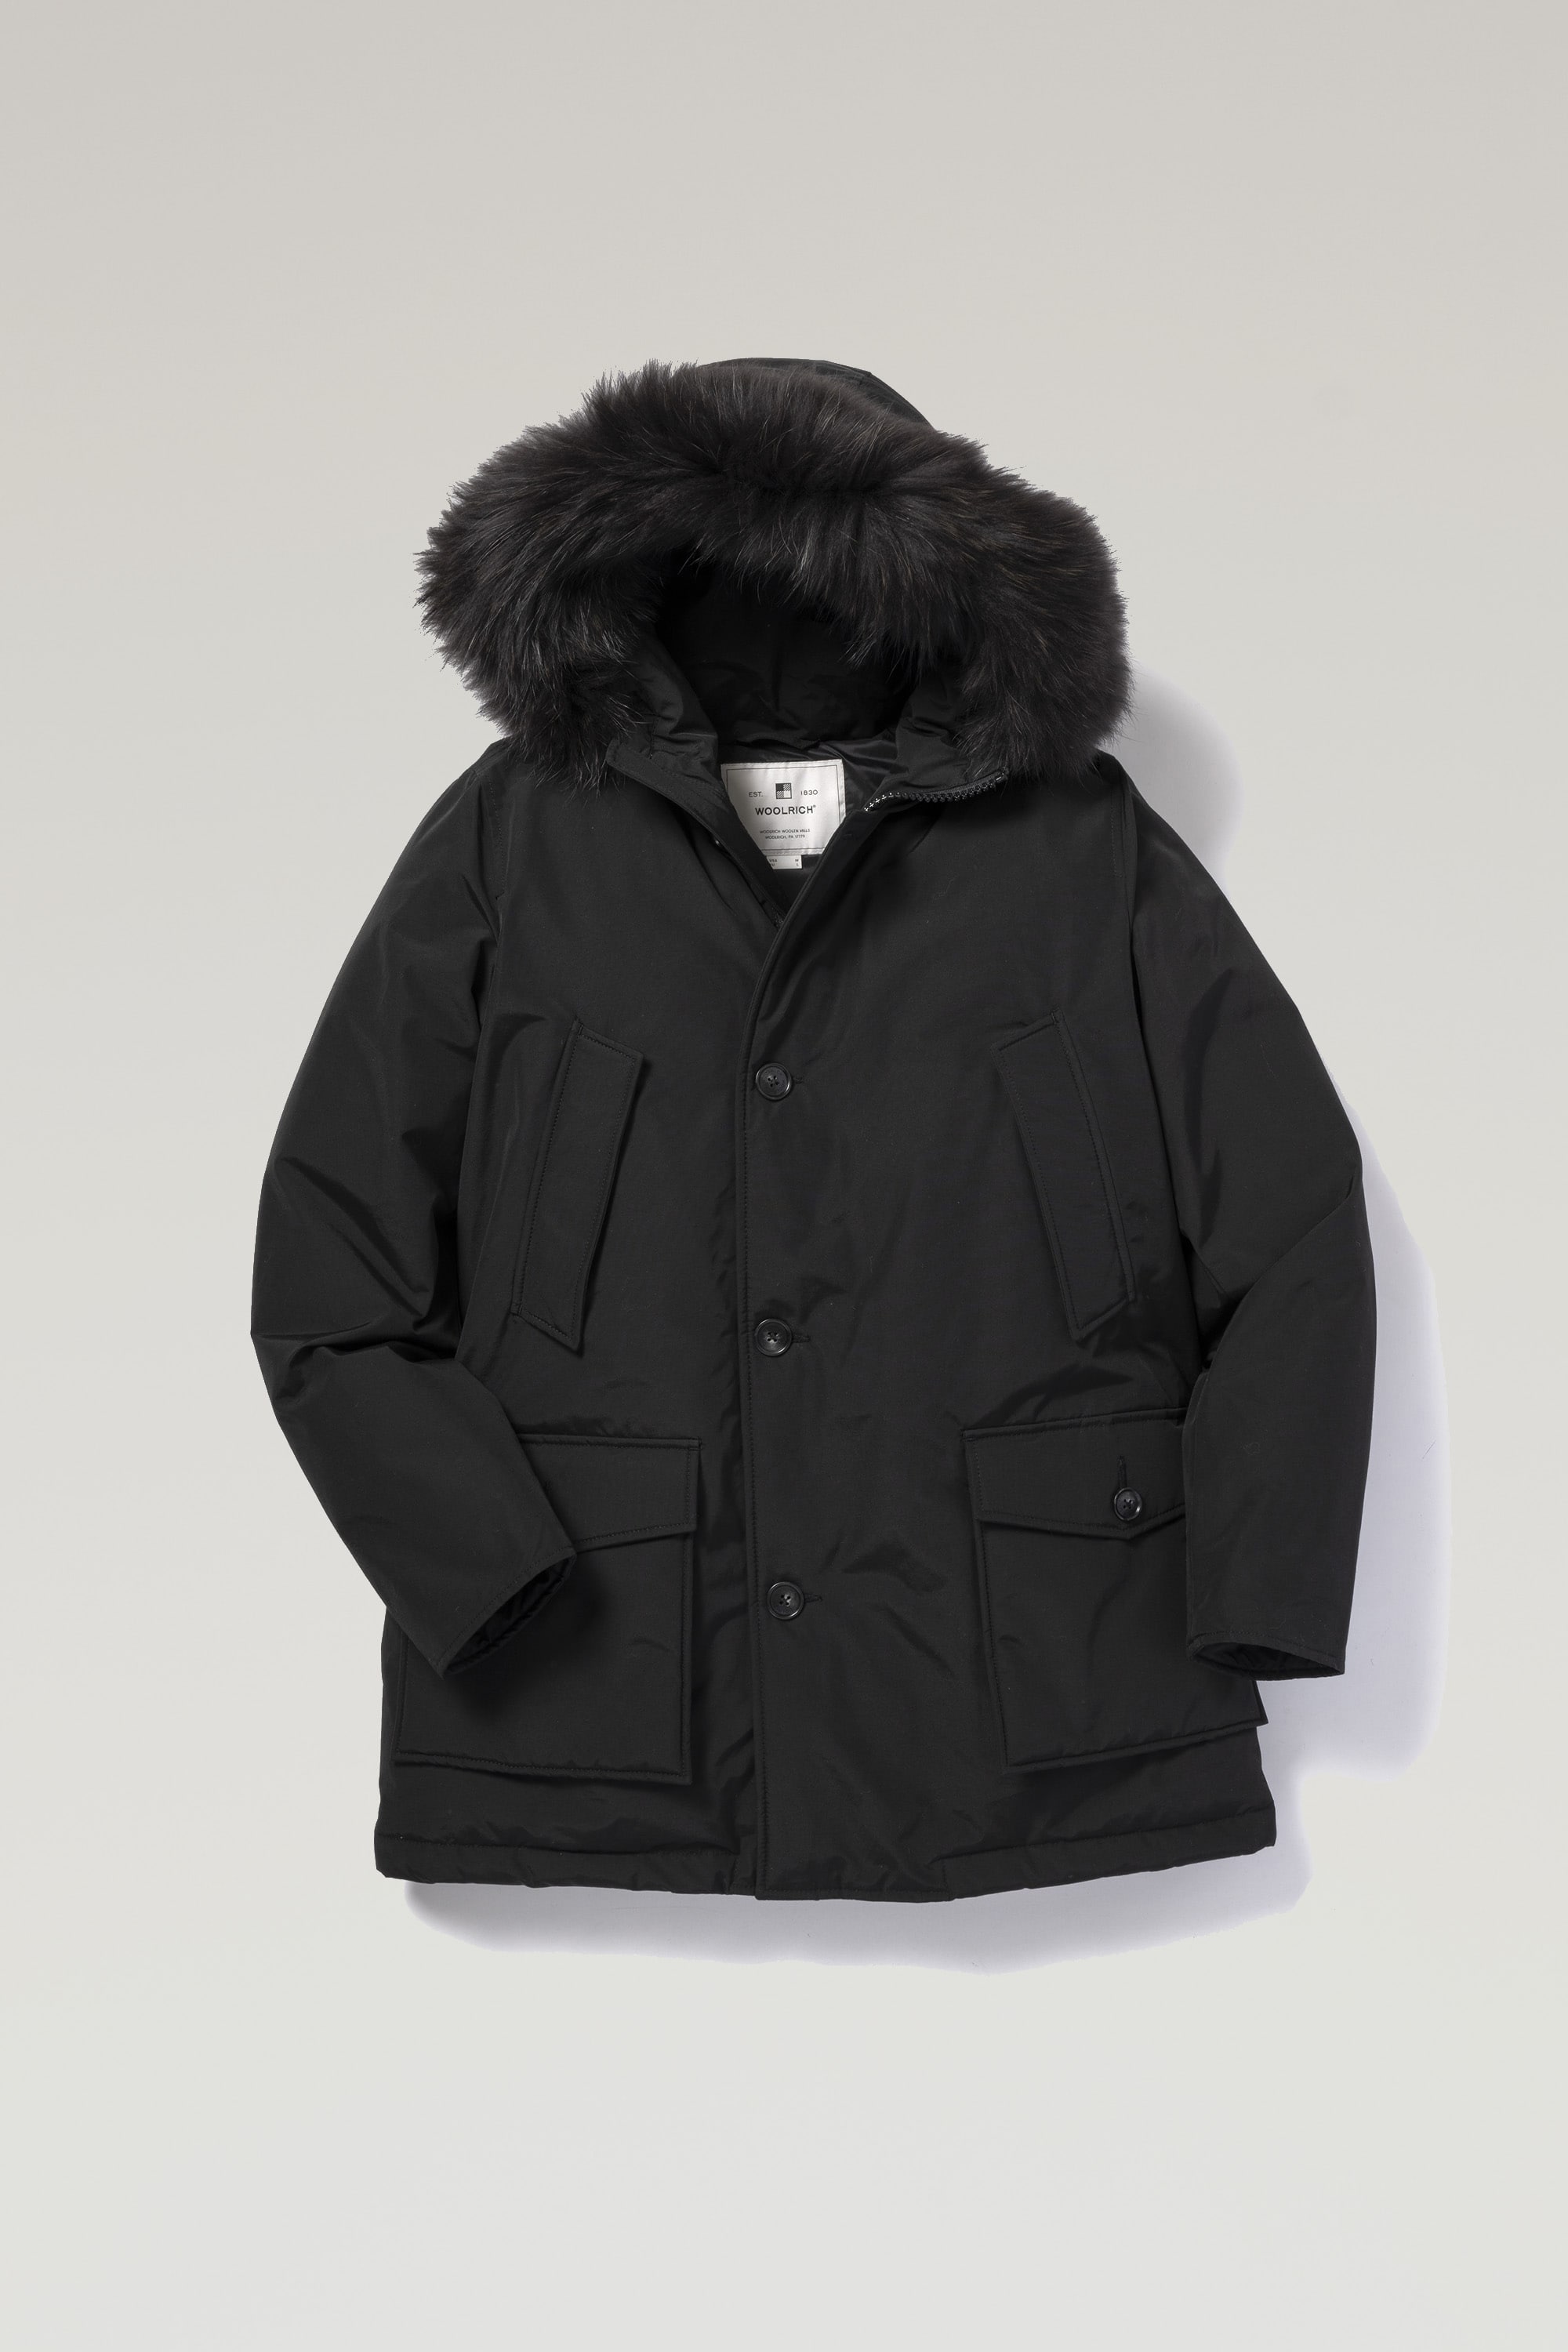 WOOLRICH ウールリッチ アークティックパーカー www.scai.in